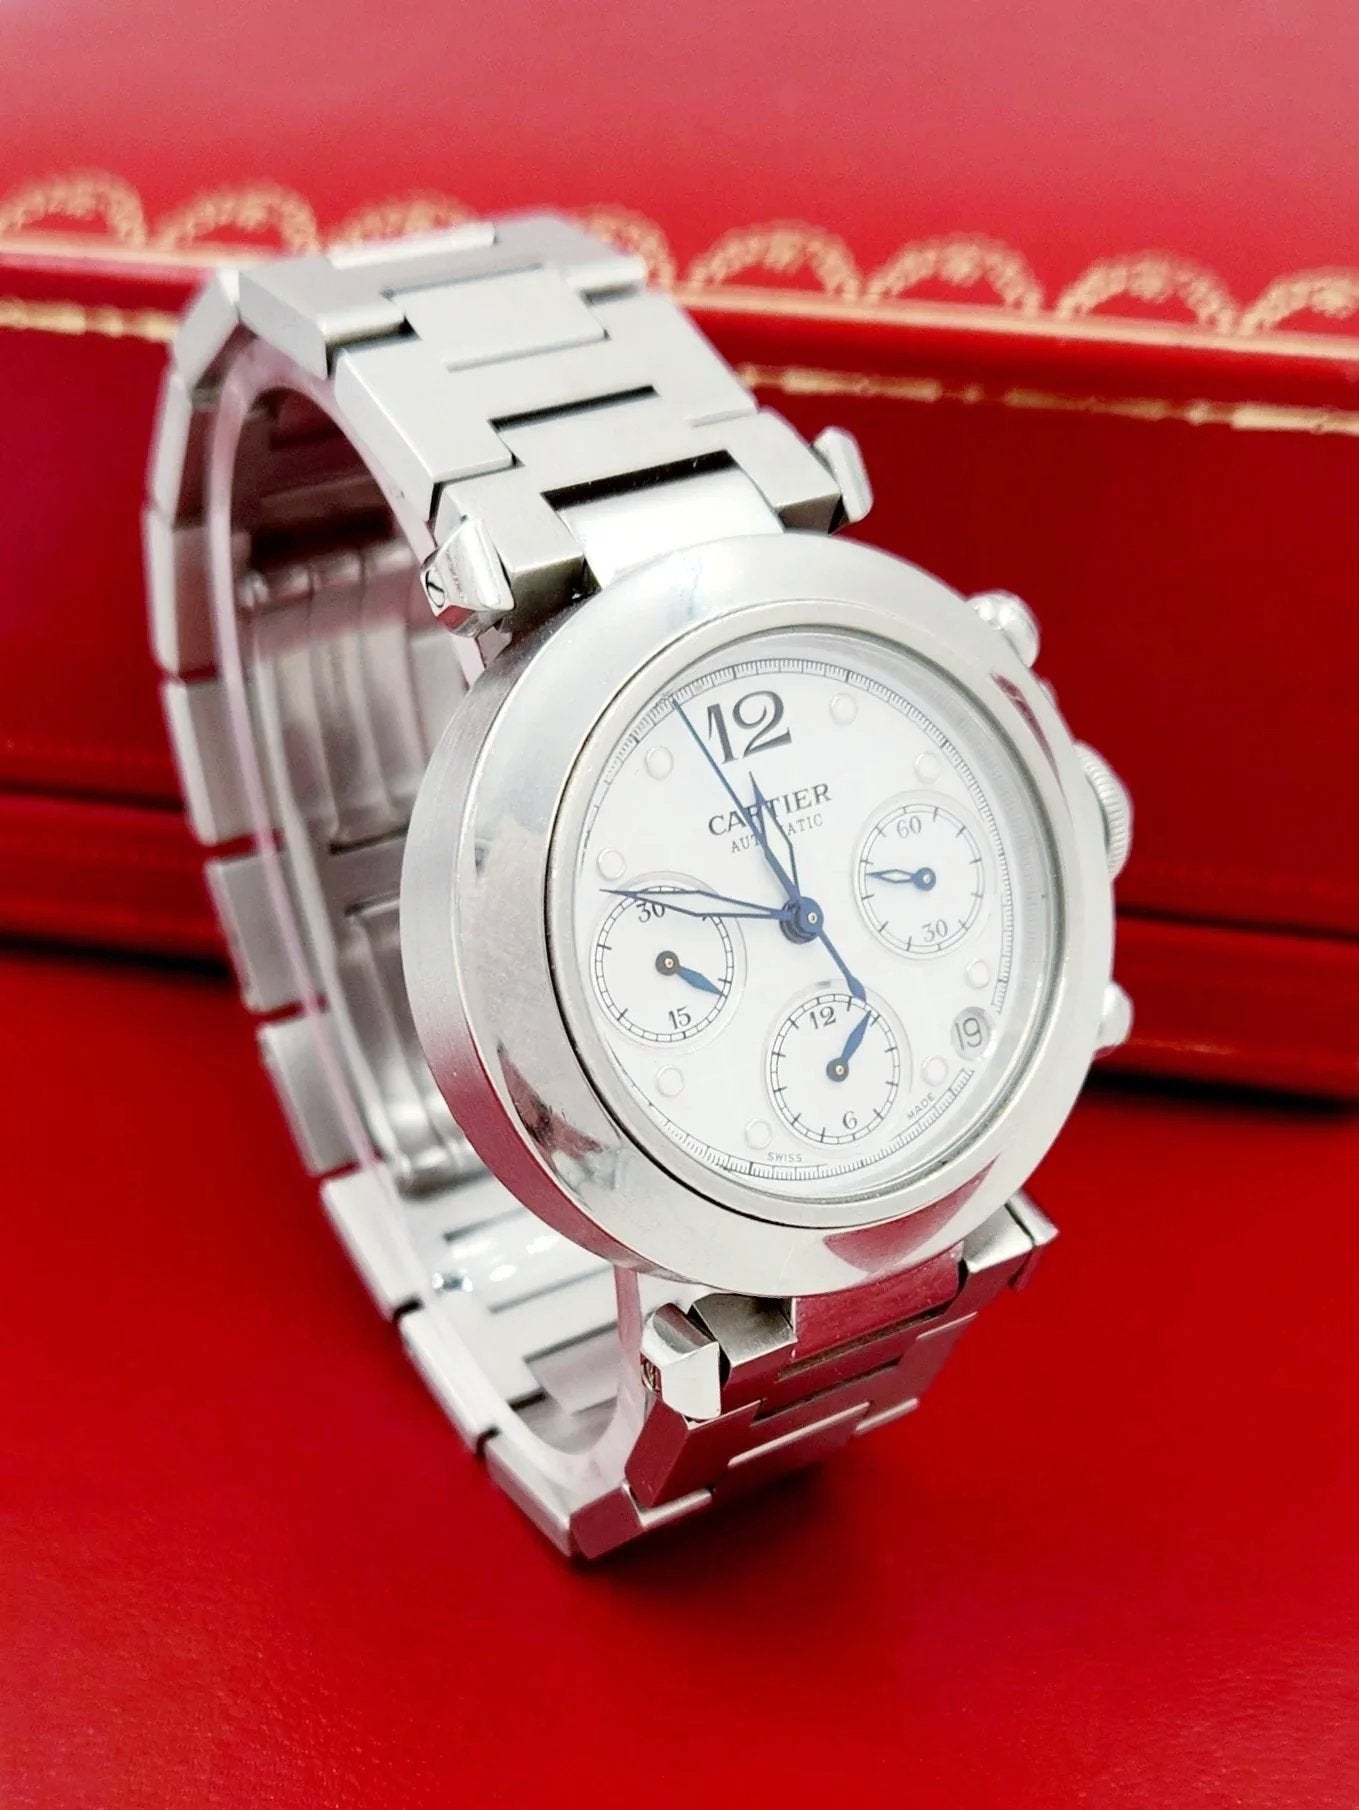 Unisex Medium 36mm Cartier Pasha Chronograph Automatic Watch with White Dial in Matte Stainless Steel. (Pre-Owned 2412)